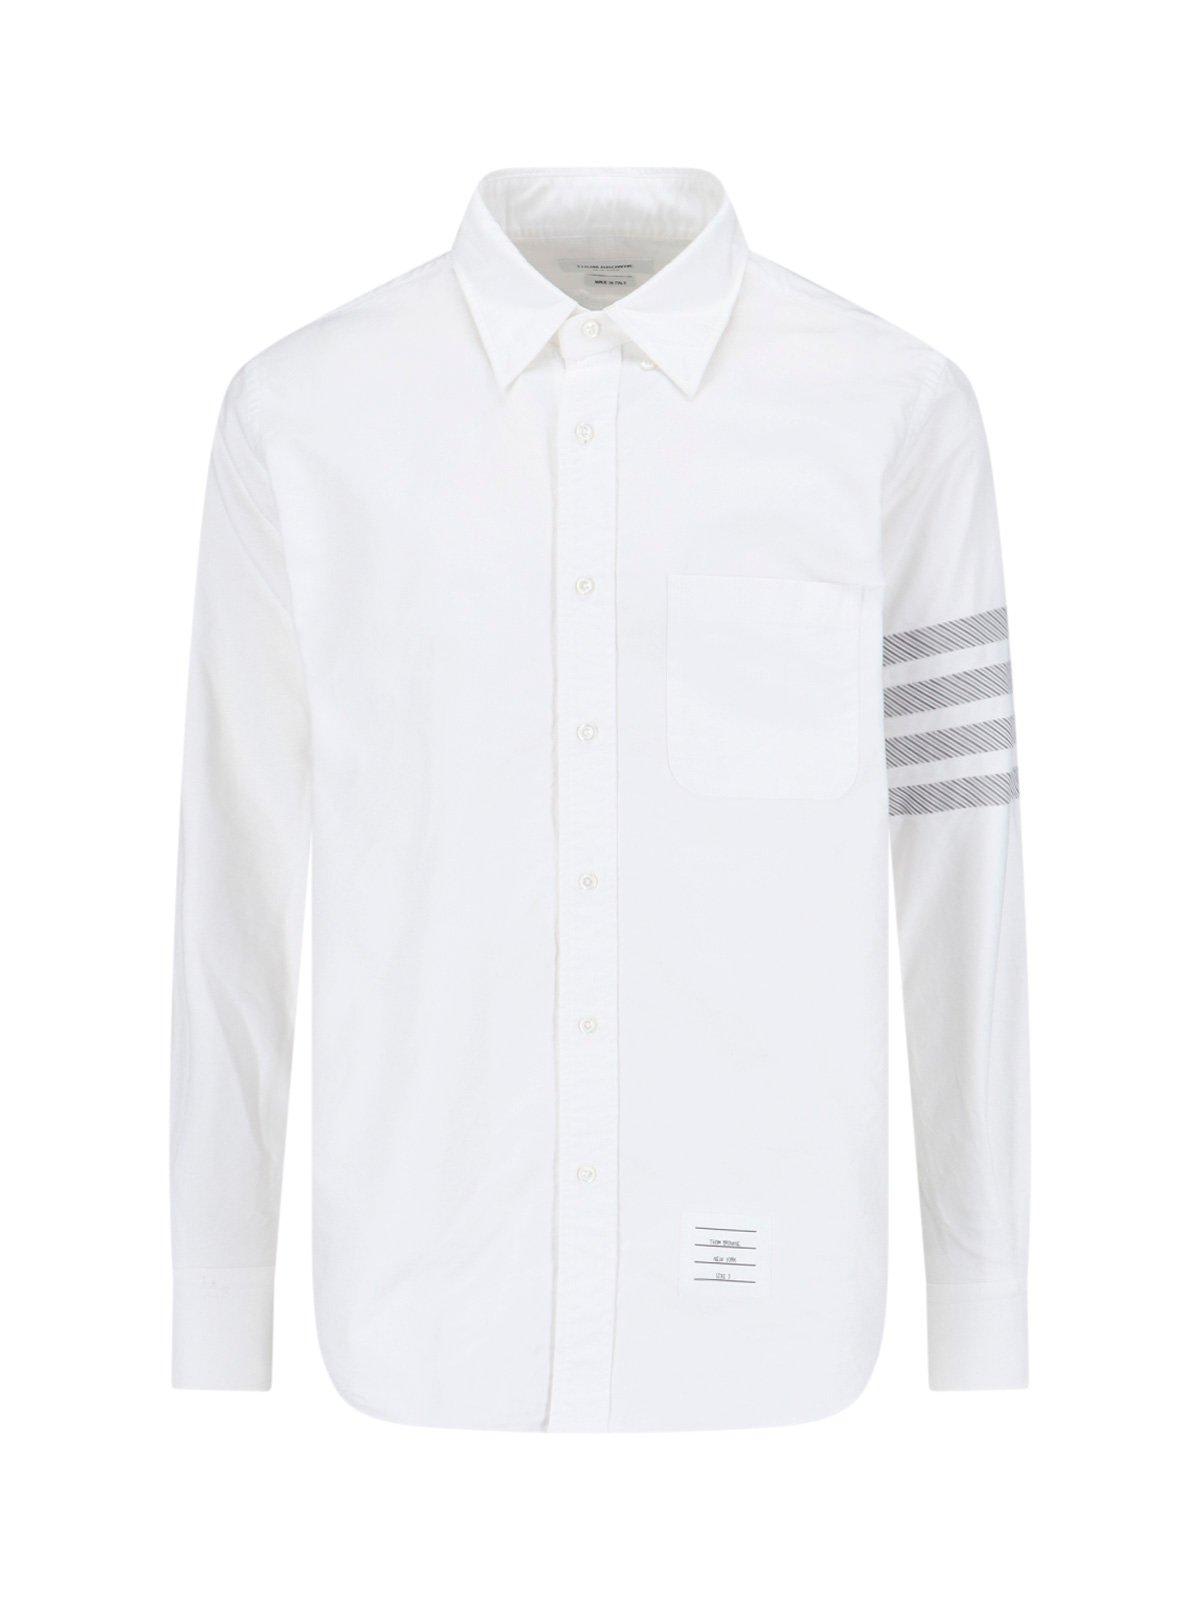 THOM BROWNE STRAIGHT FIT BUTTON DOWN SHIRT